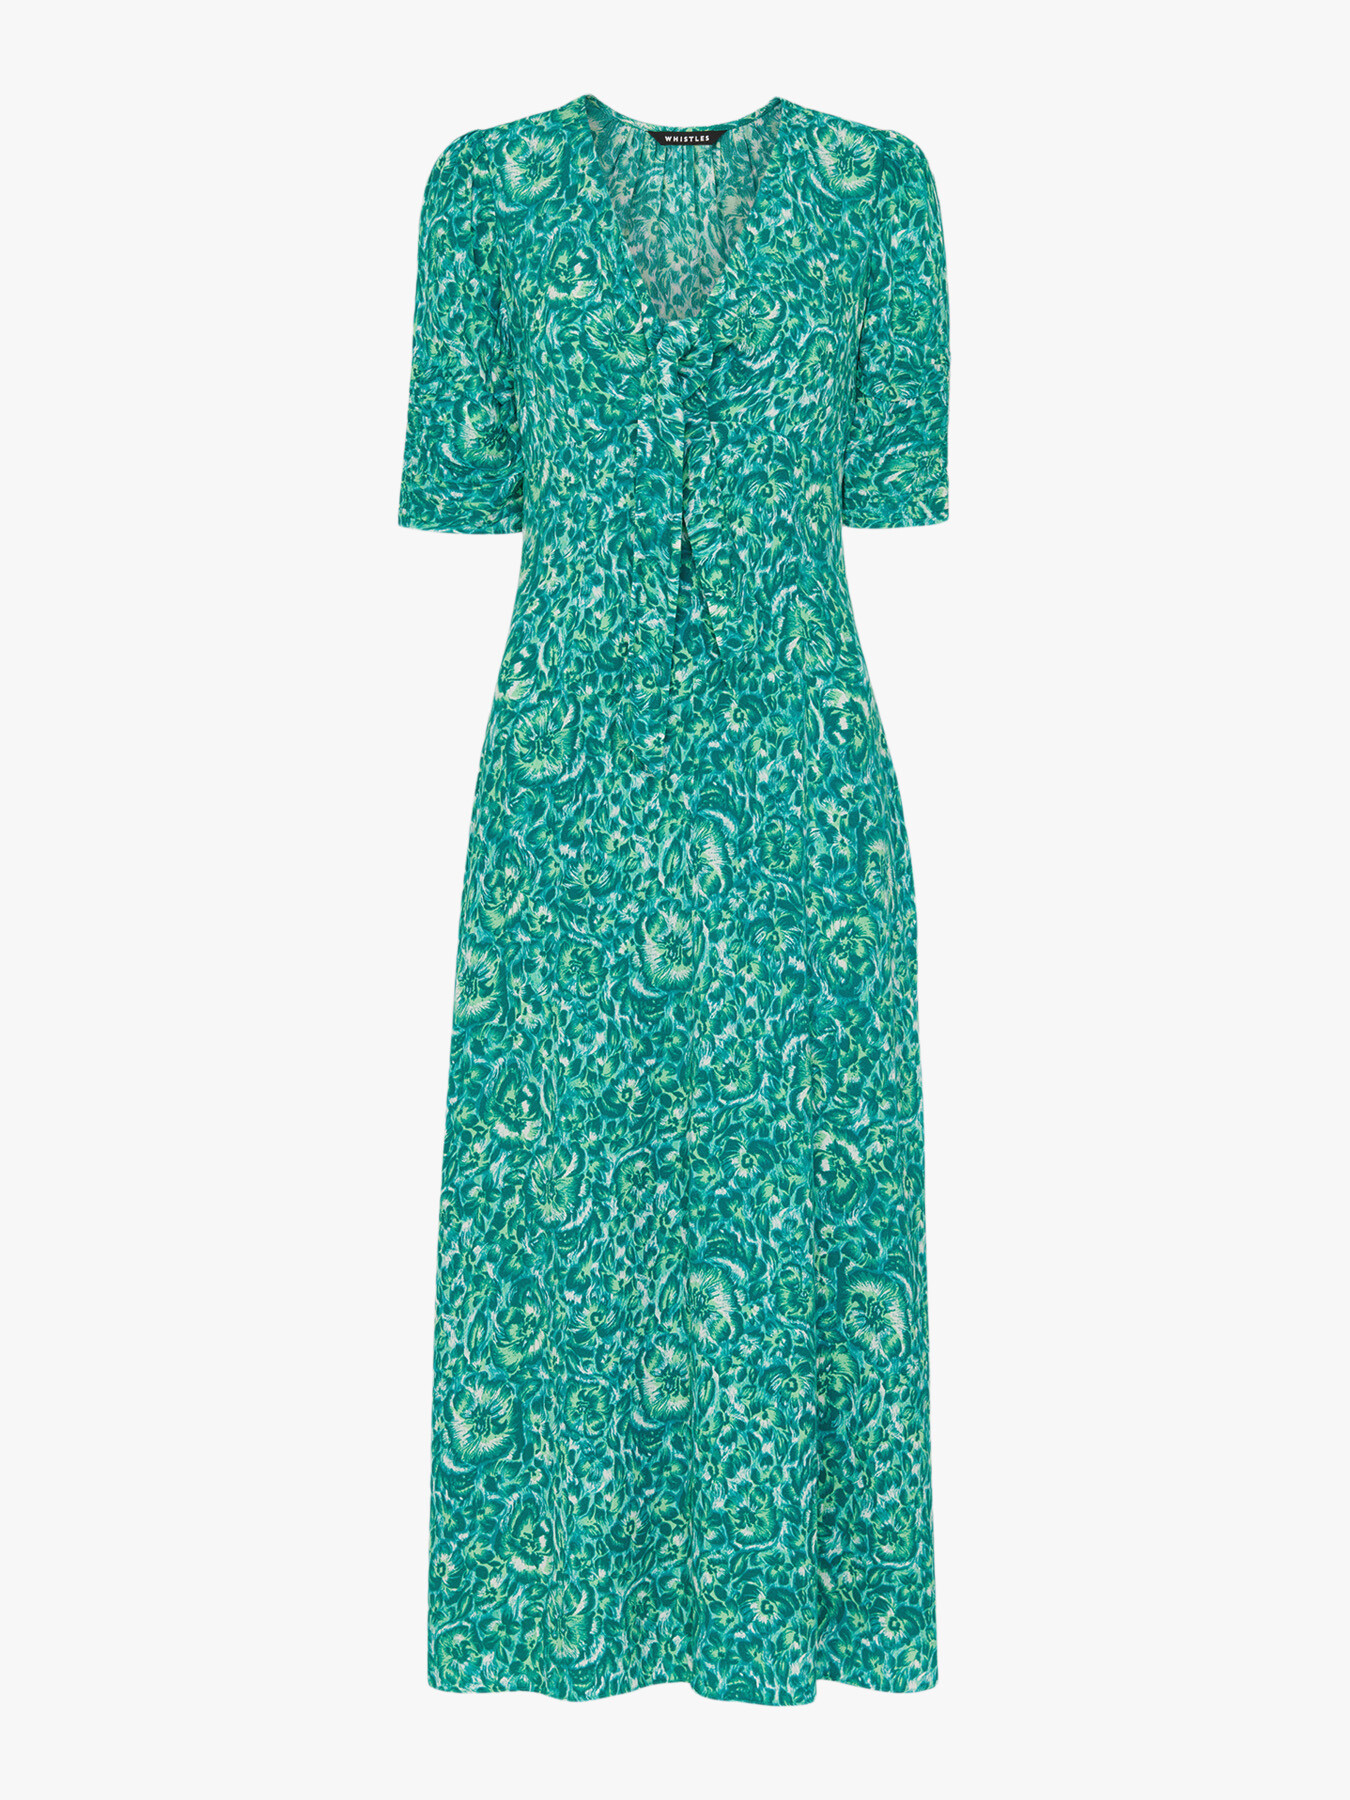 Whistles Clouded Floral Print Tie Midi Dress In Green/multi